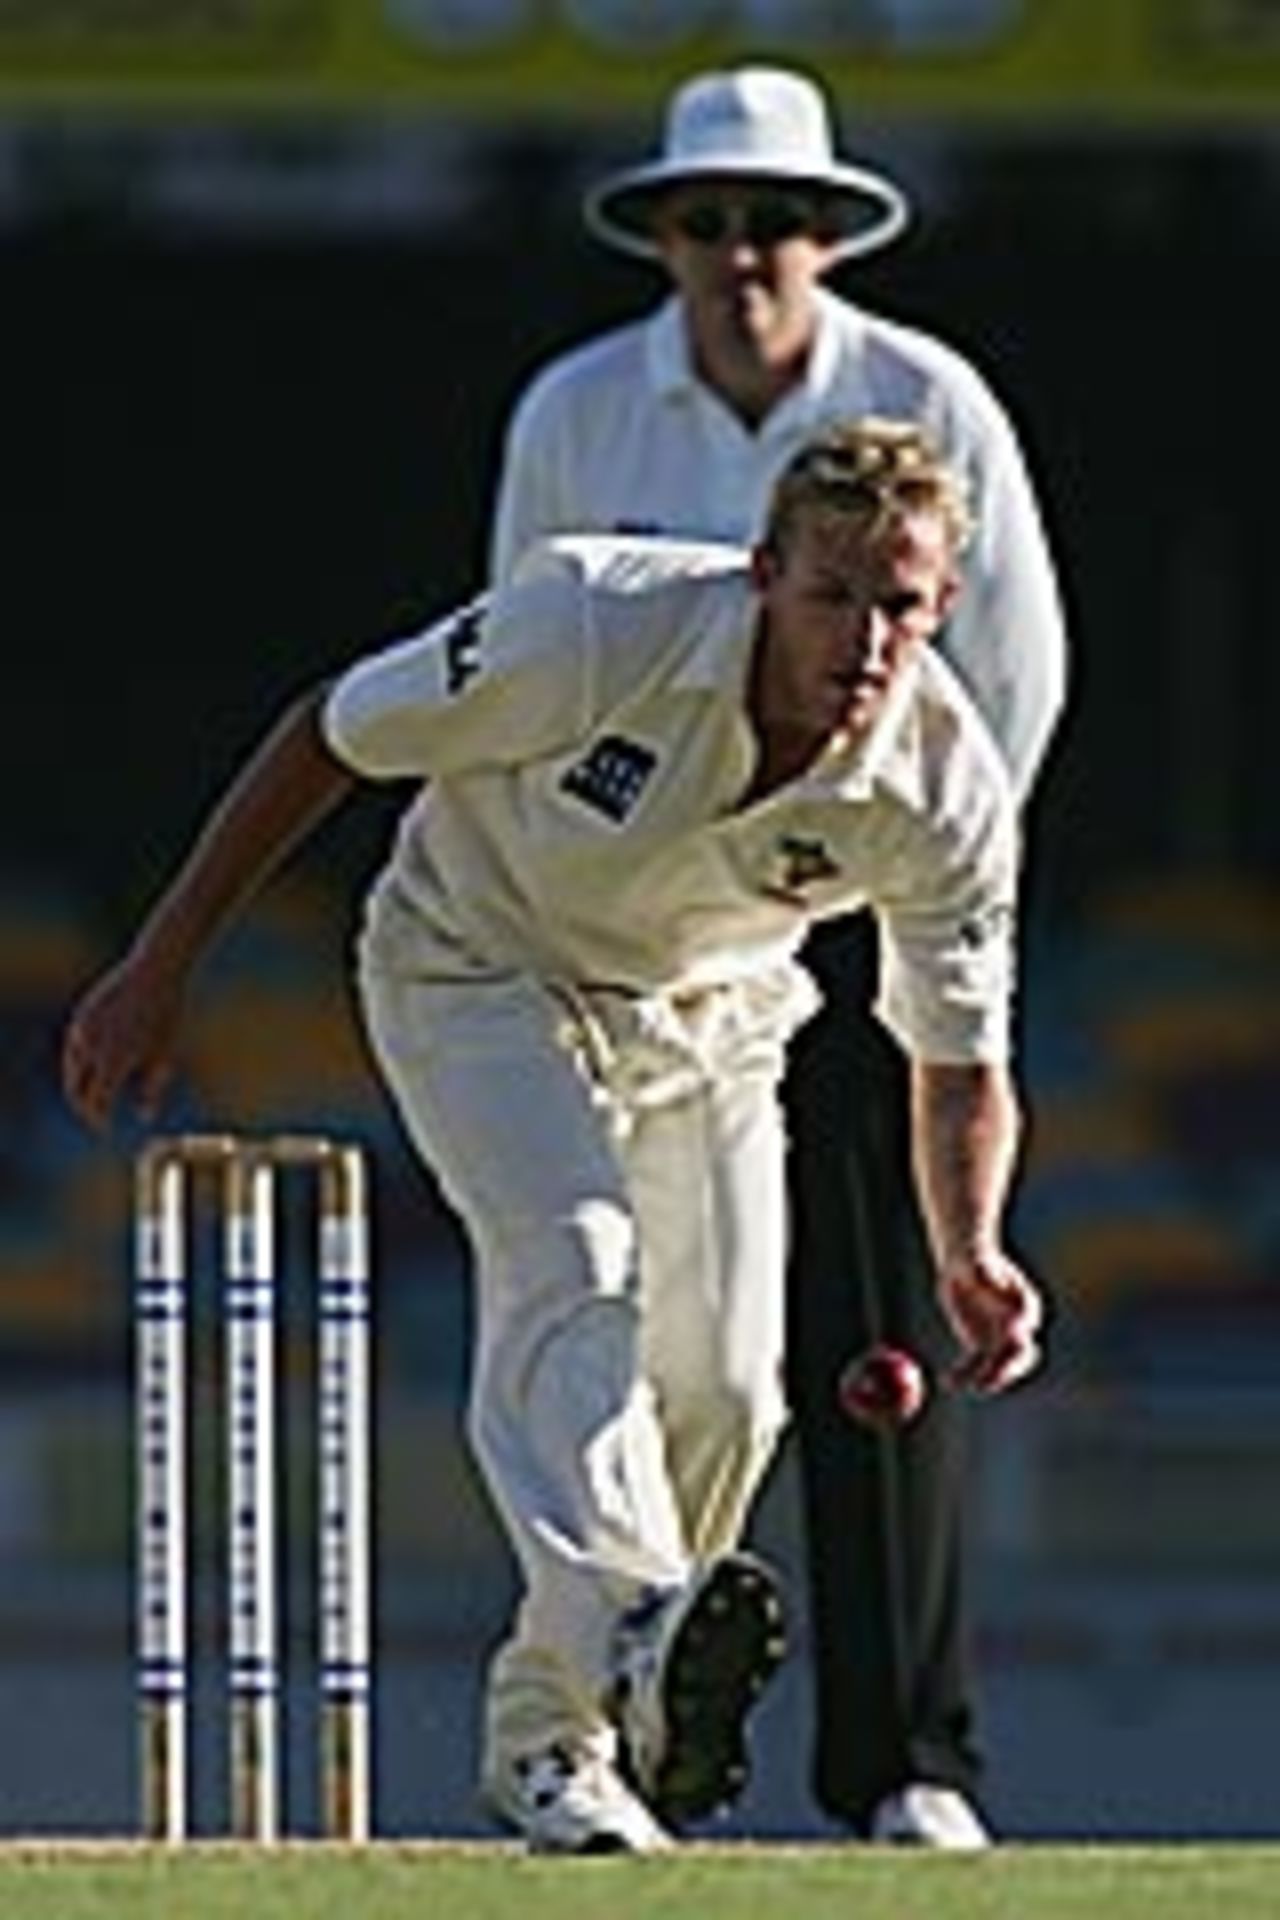 Damien Wright of the Tigers in action during day one of the Pura Cup Match between the Queensland Bulls and Tasmanian Tigers at the Gabba November 29, 2004, Brisbane, Australia.